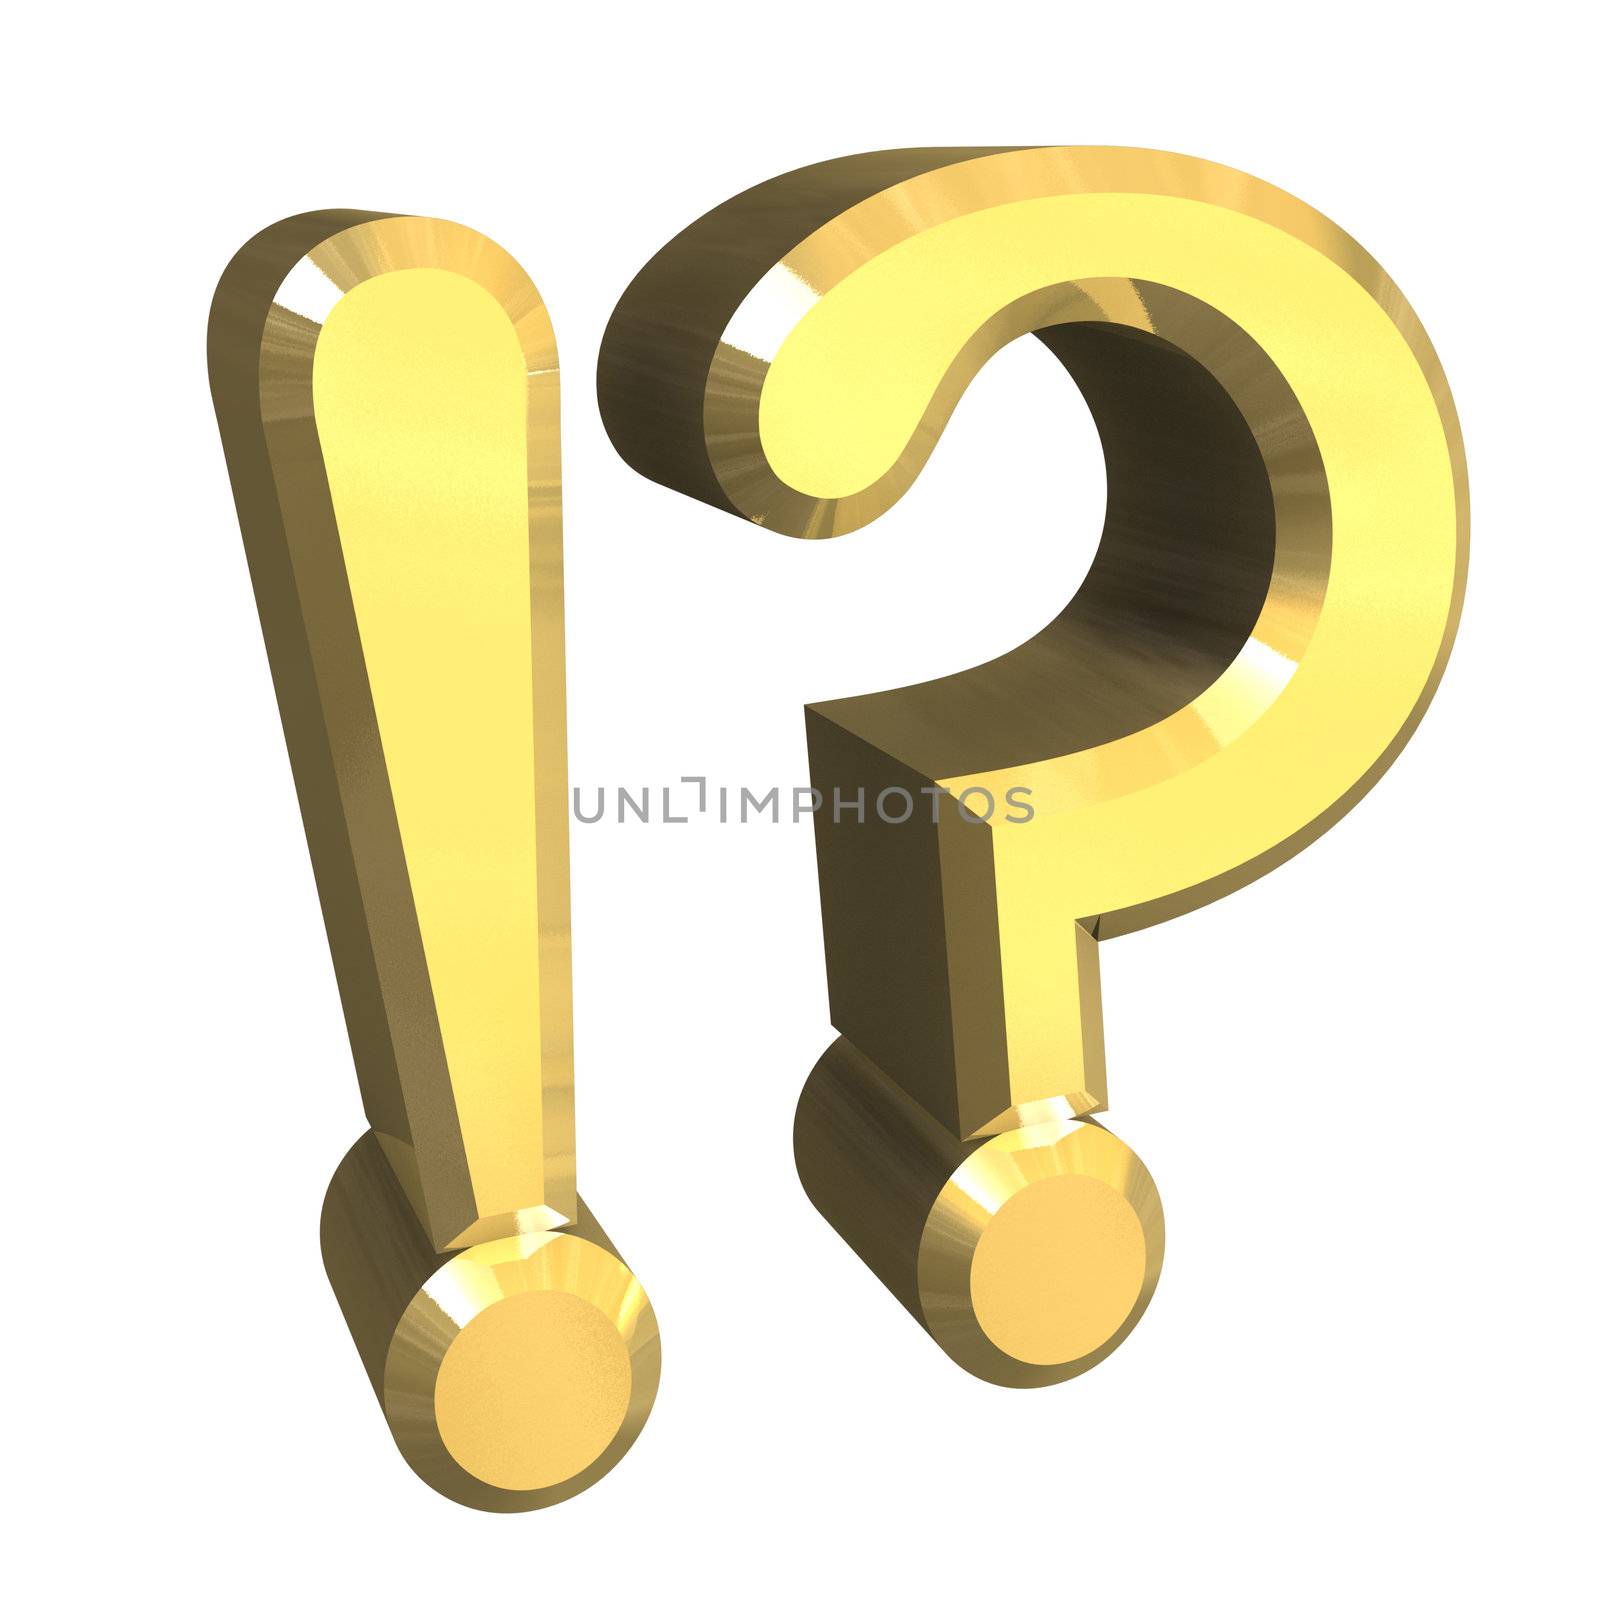 question mark & exclamation mark in gold isolated - 3D made